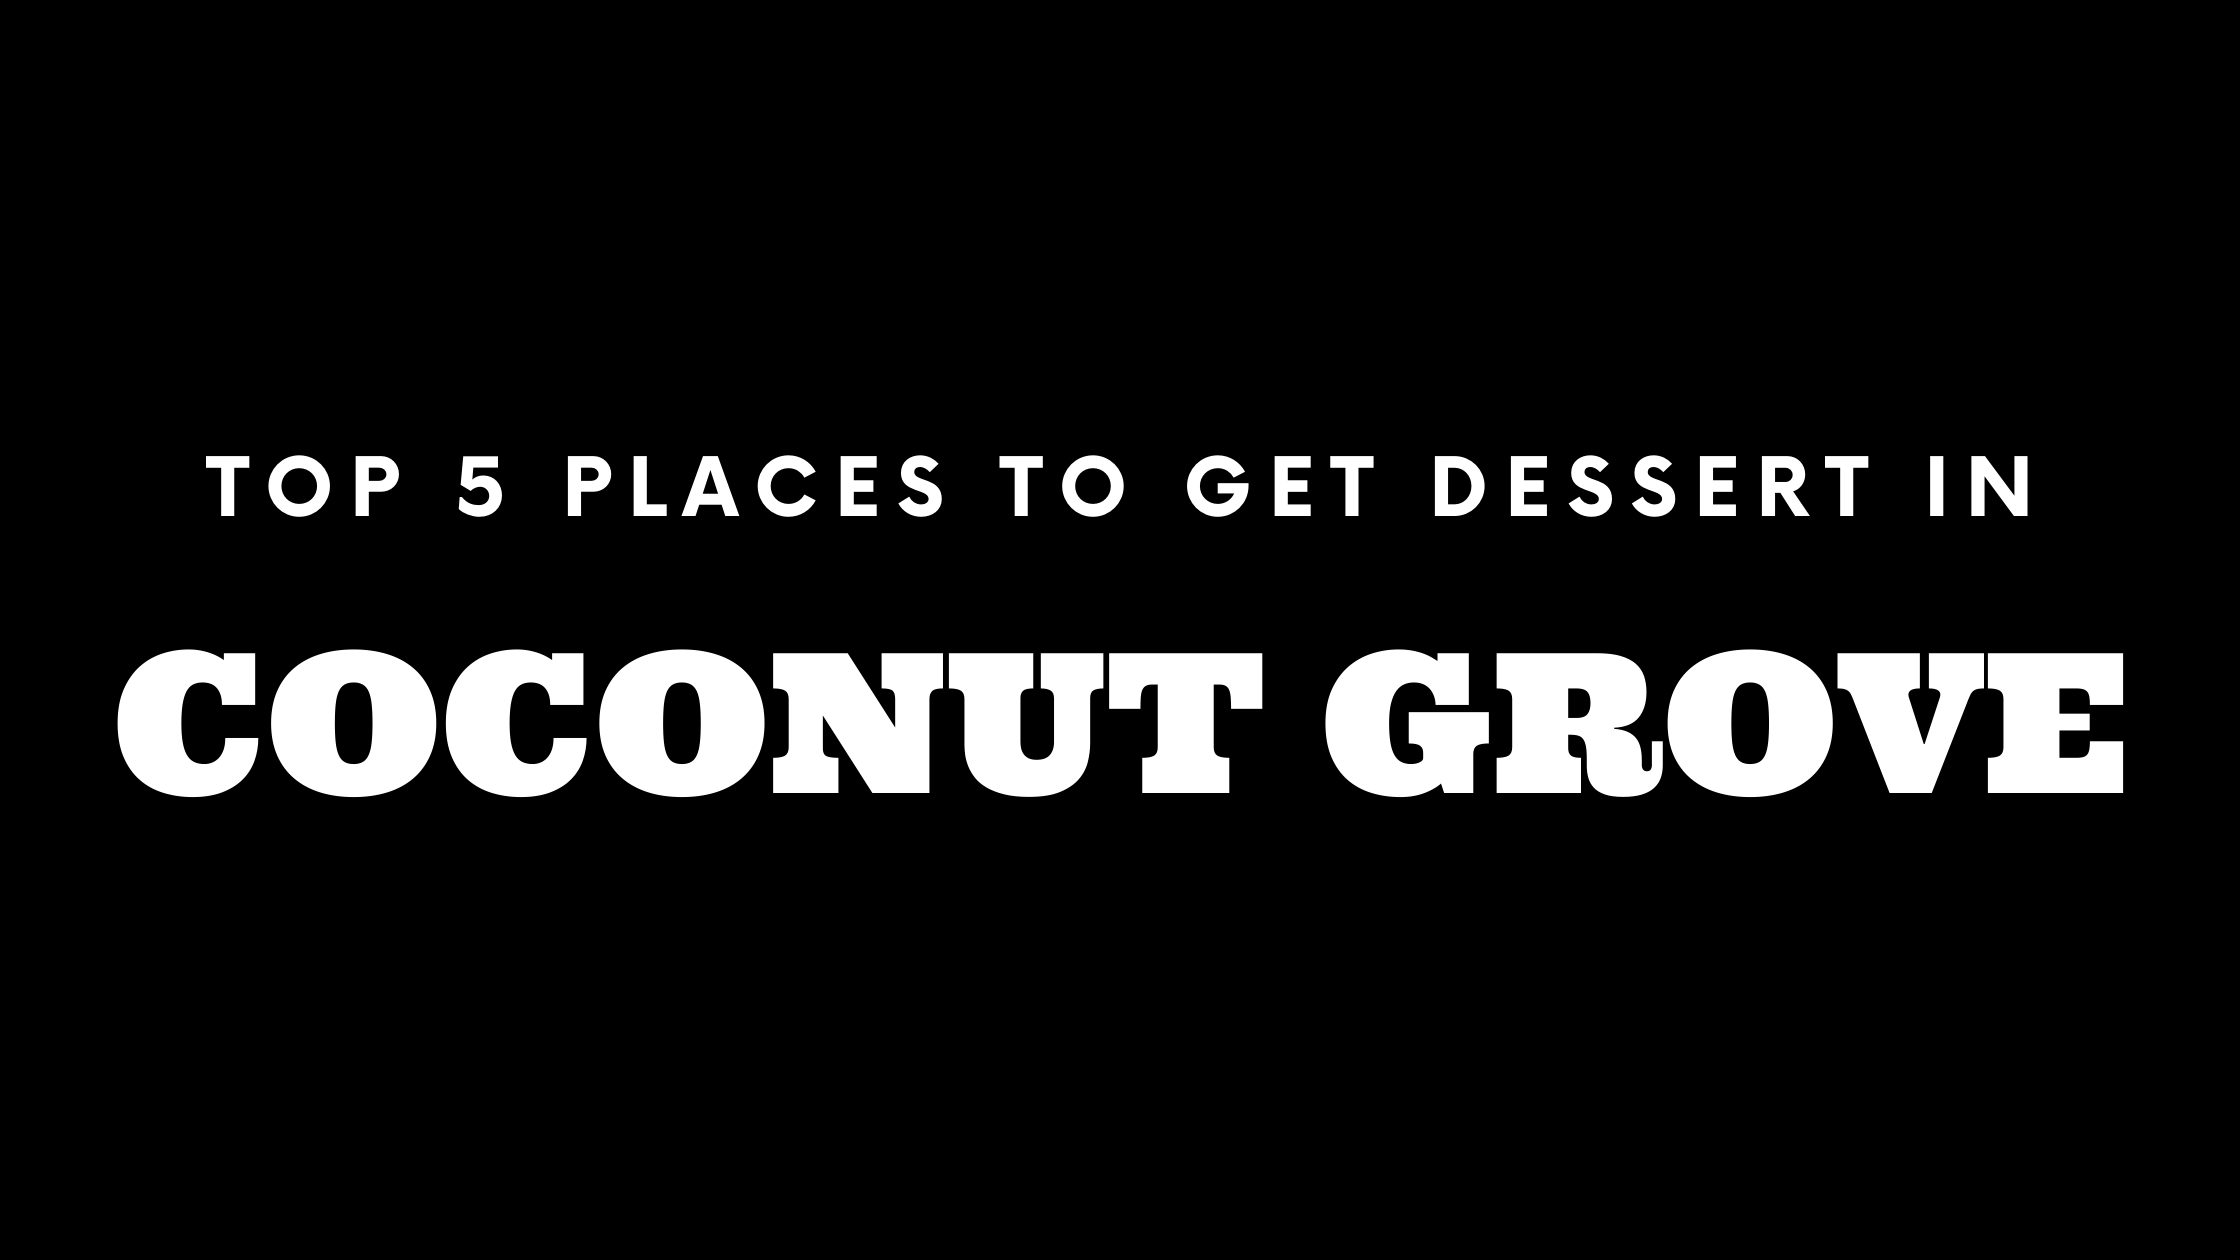 Top 5 Places to Get Dessert in Coconut Grove